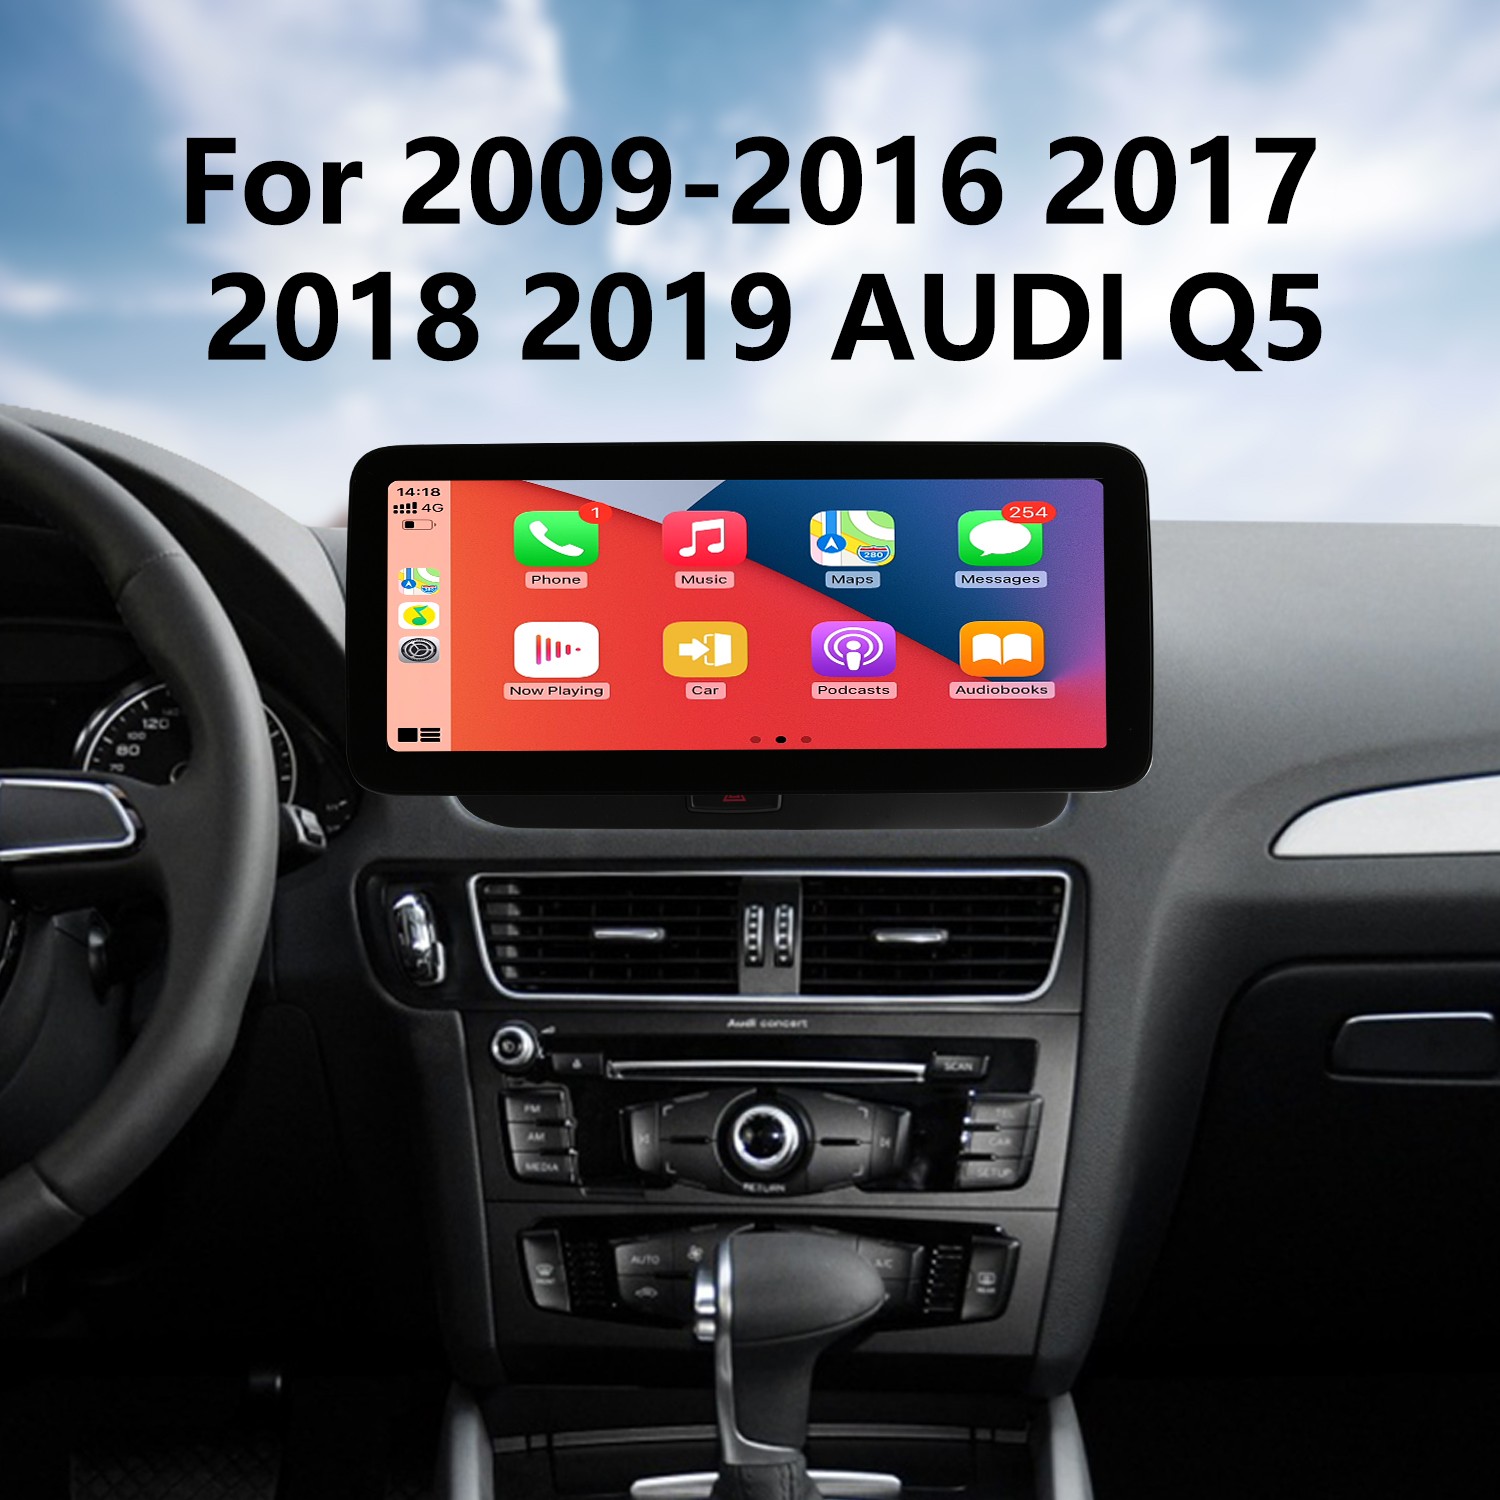 Carplay 12.3 inch Radio HD touchscreen Android Auto for 2009-2016